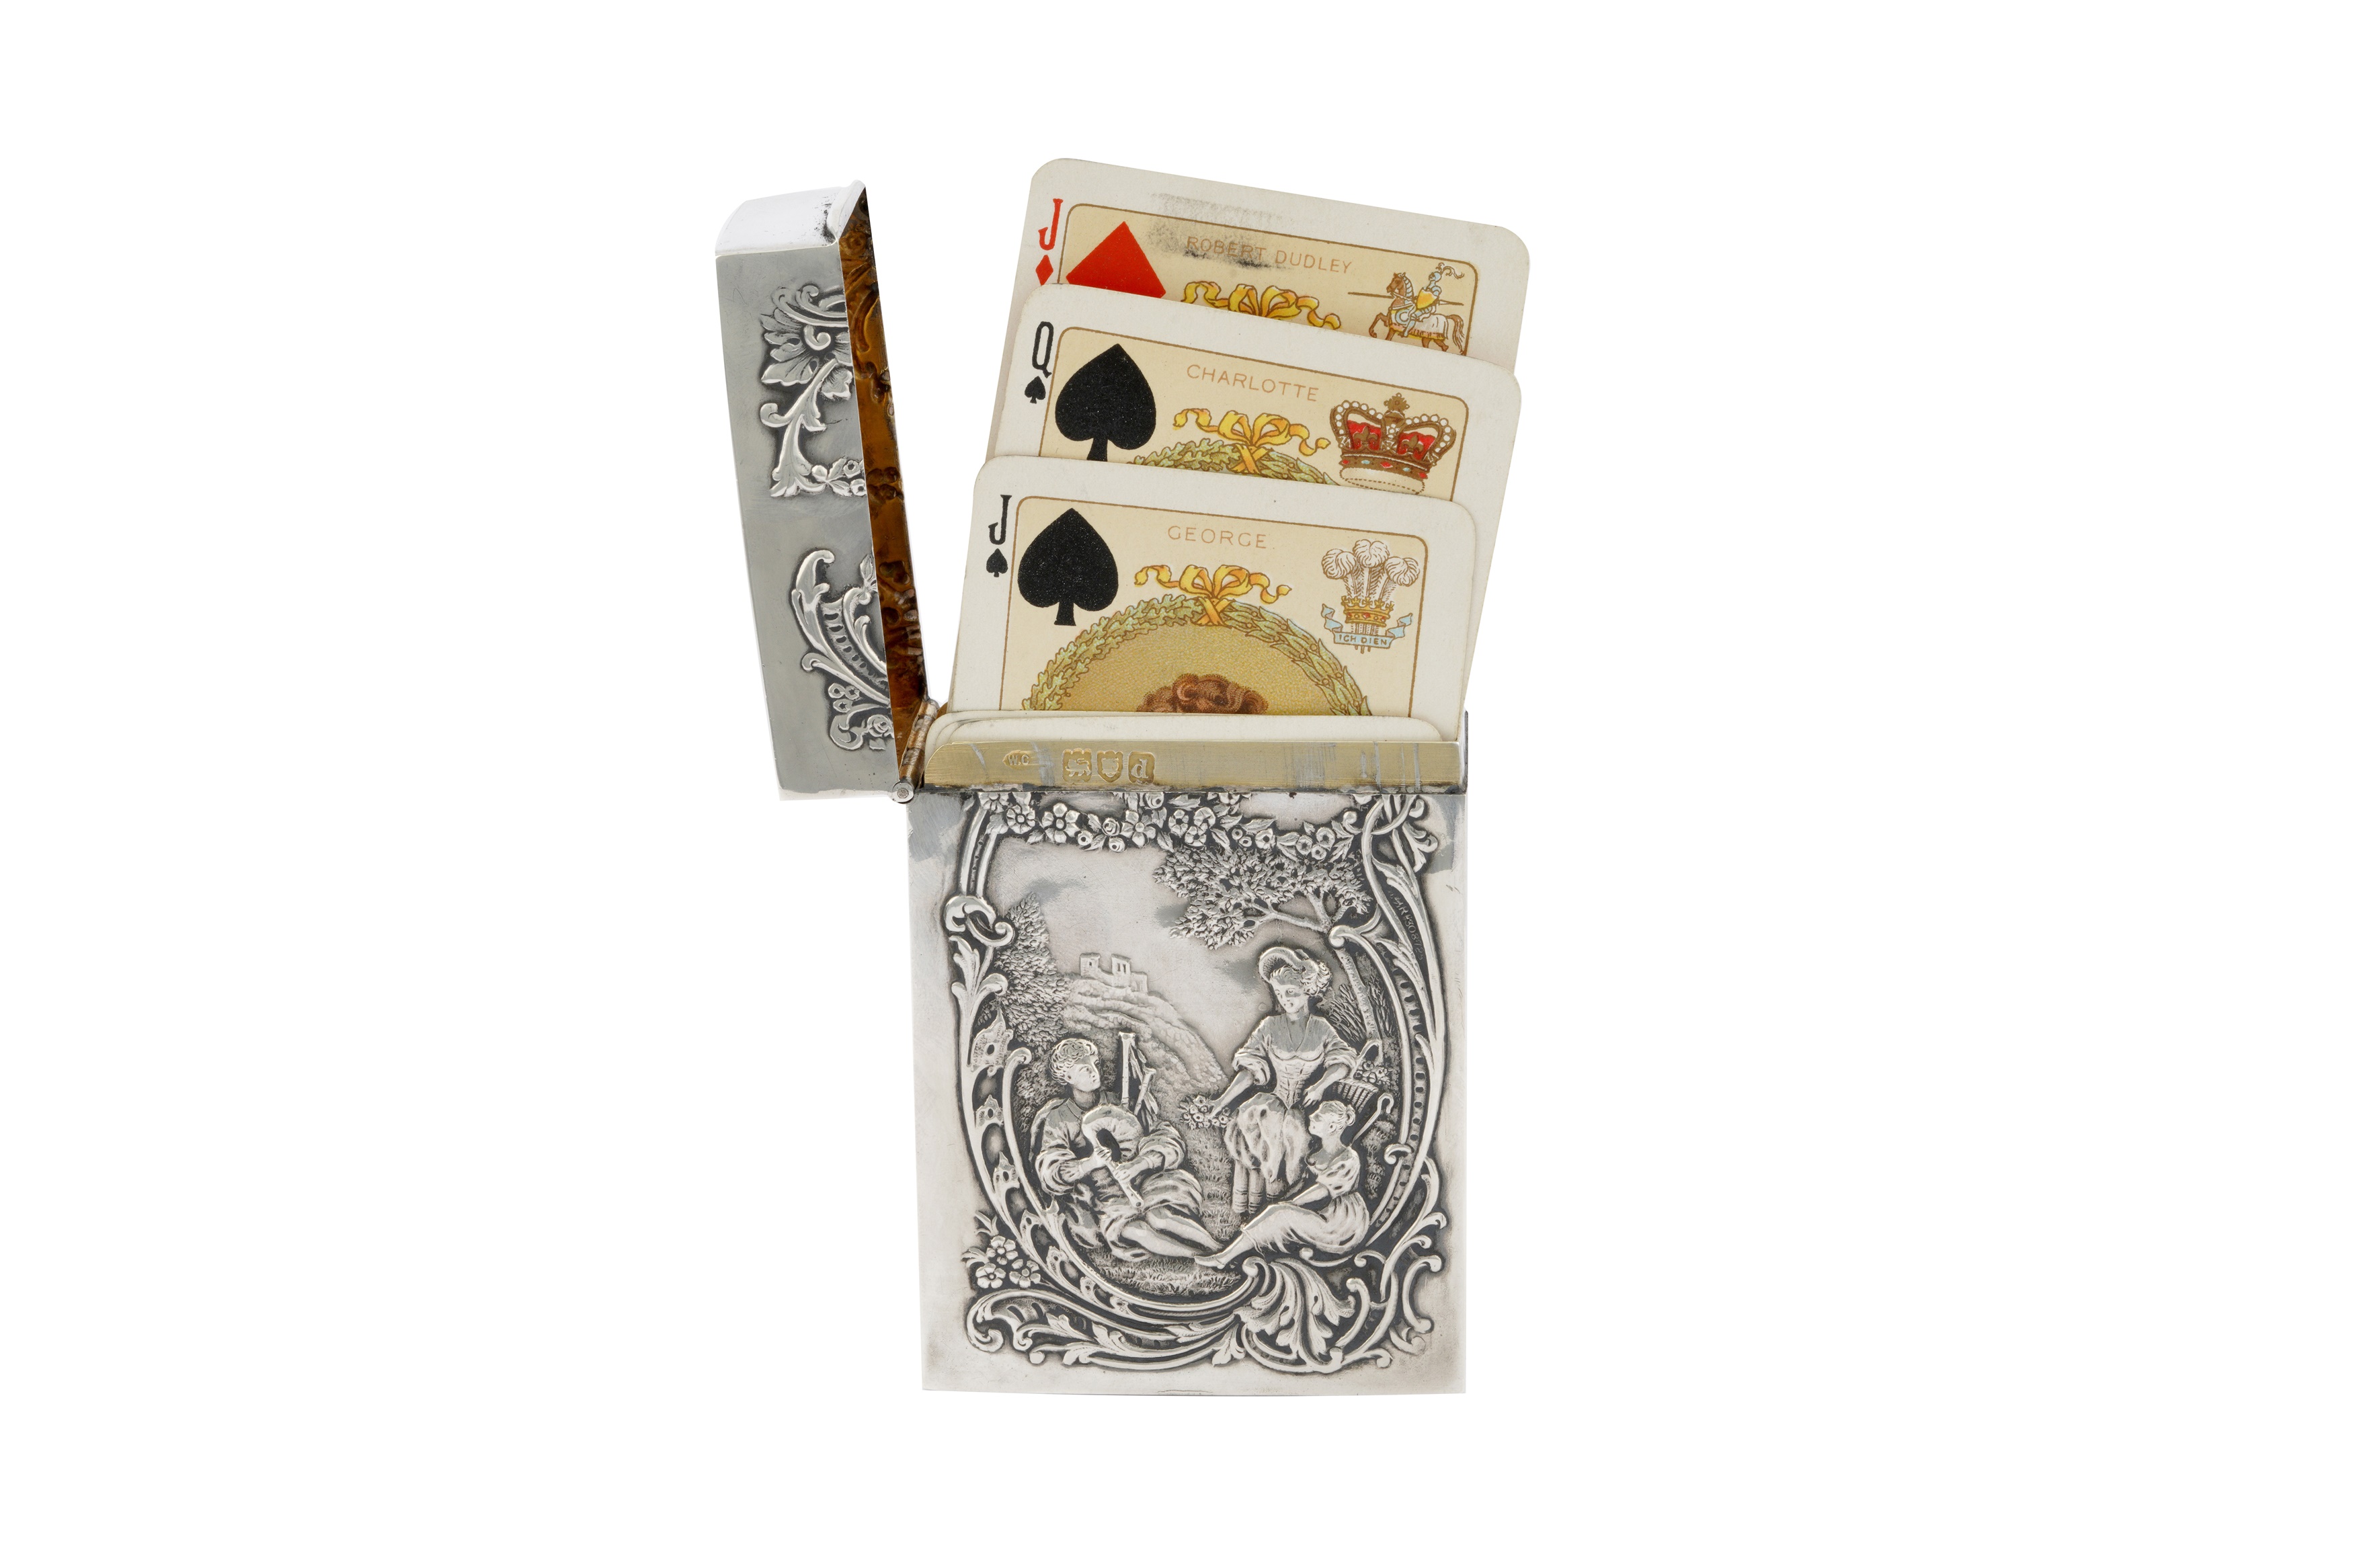 A VICTORIAN STERLING SILVER KINGS AND QUEEN OF ENGLAND PLAYING CARDS BOX, LONDON 1900 BY WILLIAM - Image 2 of 4